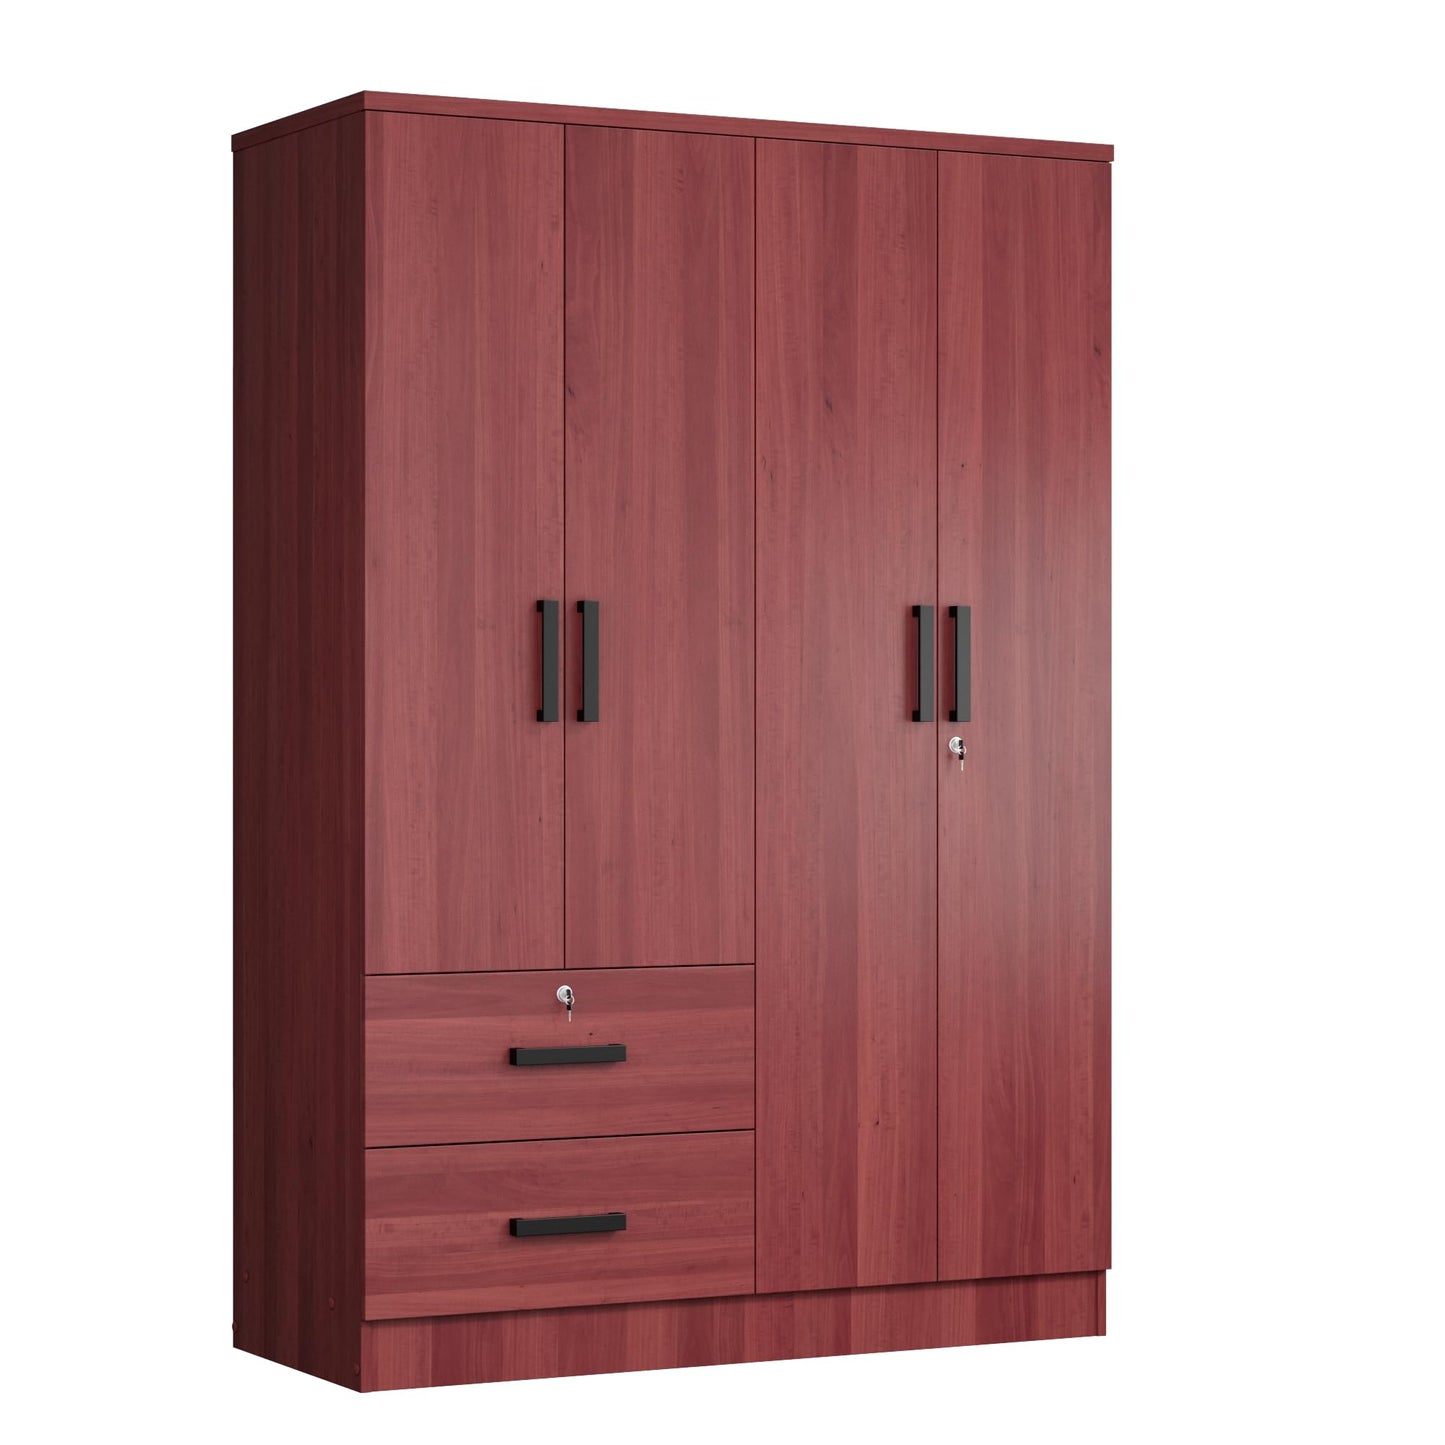 Woodpeckers Furniture And Mattress 4 Doors Wardrobe 2 Drawers with Shelves 72" high (Mahogany)